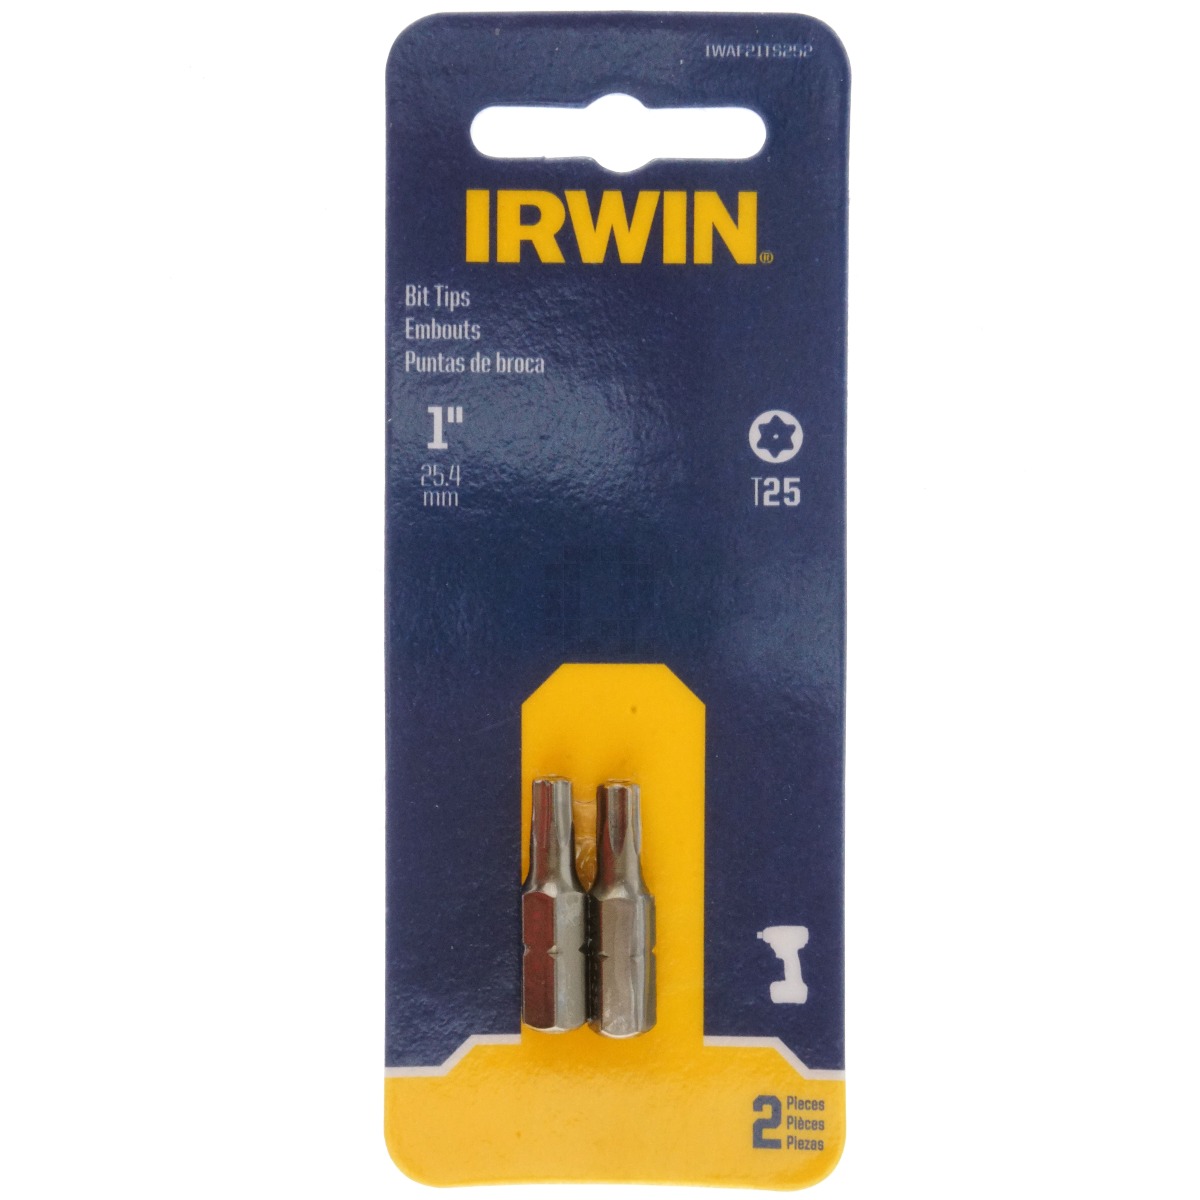 Irwin IWAF21TS252 T25 TORX Tamper-Proof Security Bit Tips, 1" Length, 2 Pack